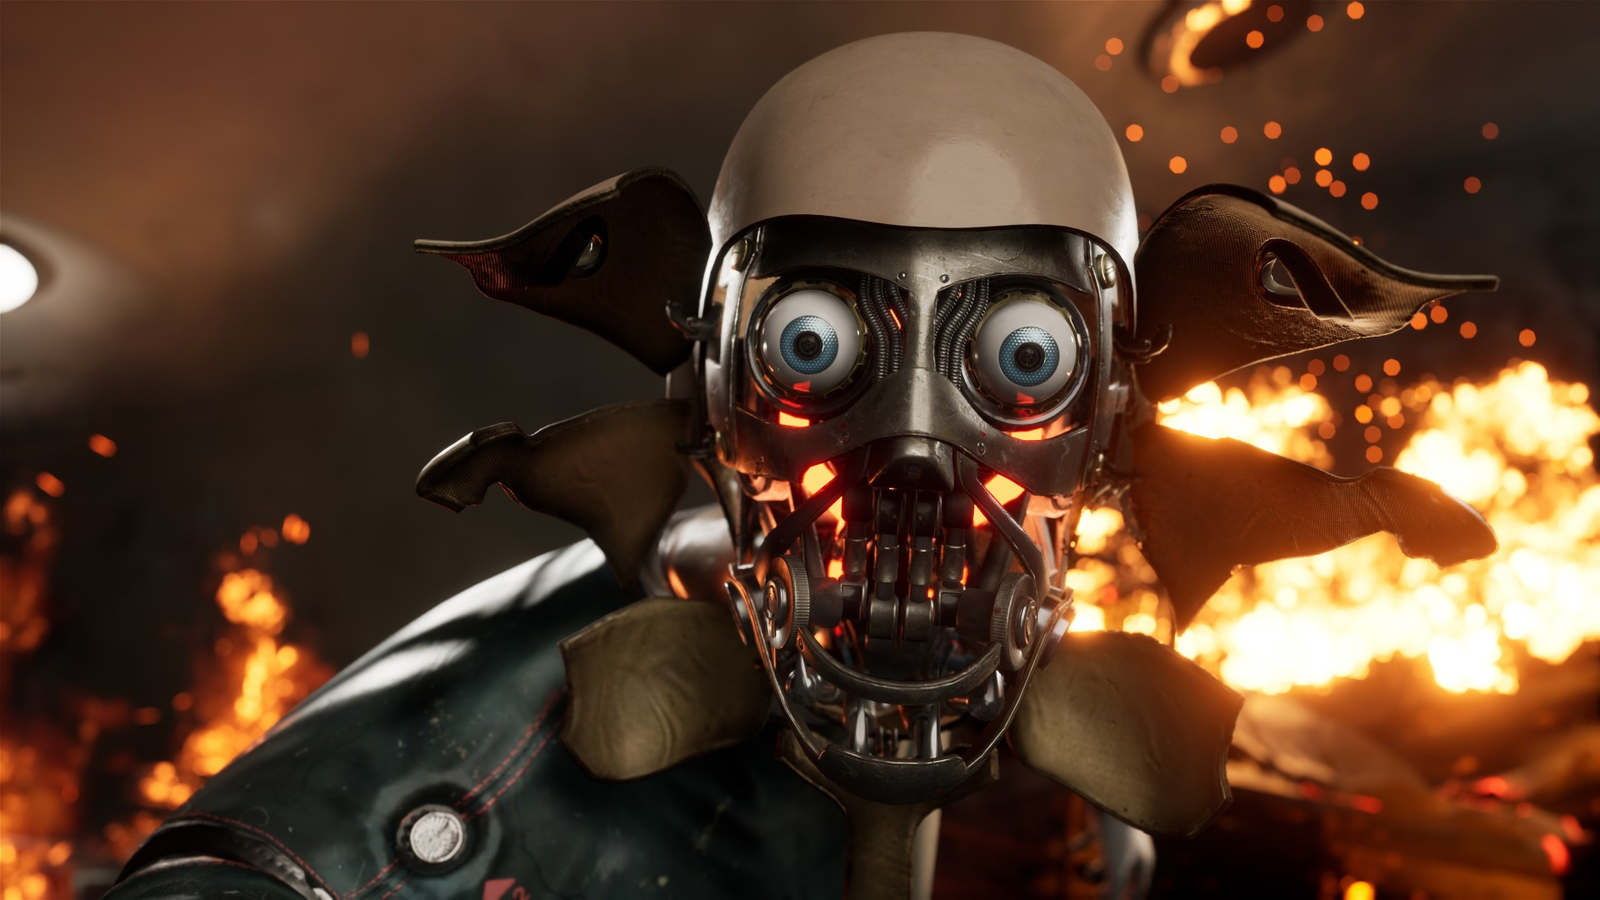 A welcome mix of Bioshock and Fallout  Full Review - Atomic Heart - Atomic  Heart - TapTap